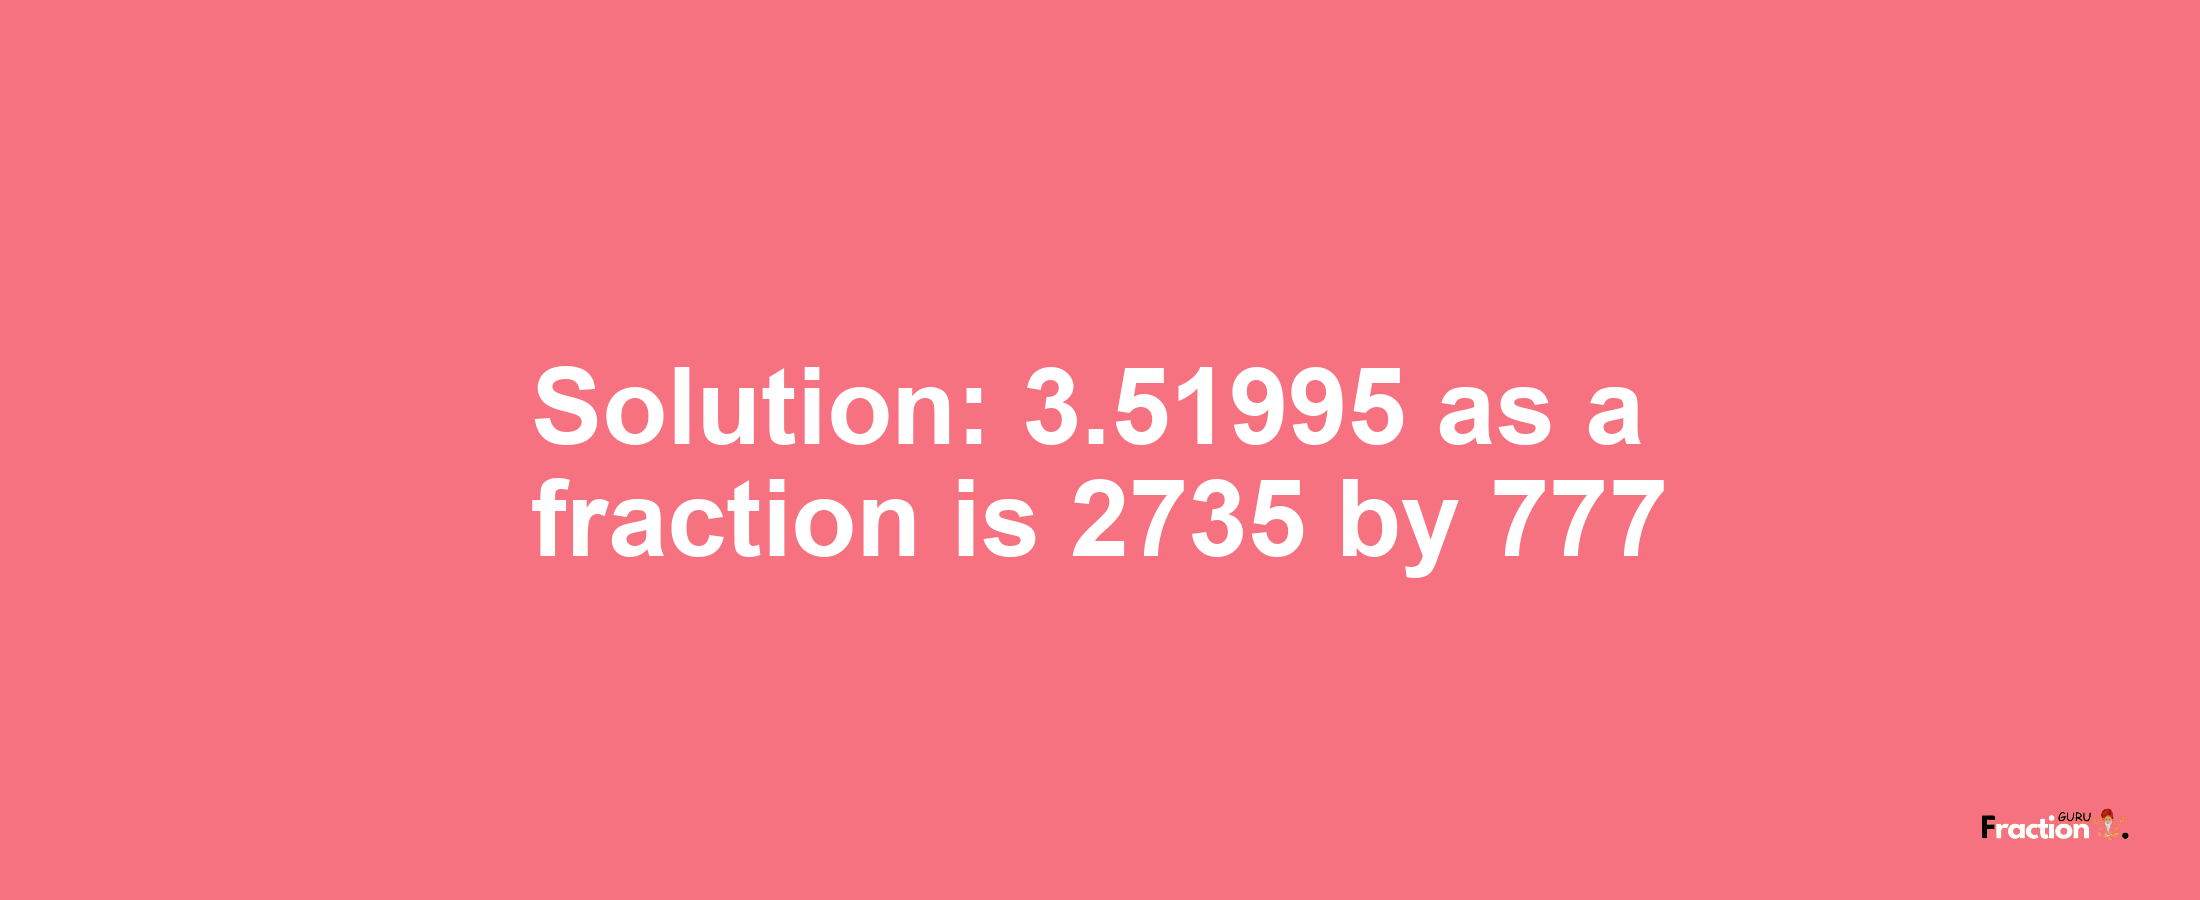 Solution:3.51995 as a fraction is 2735/777